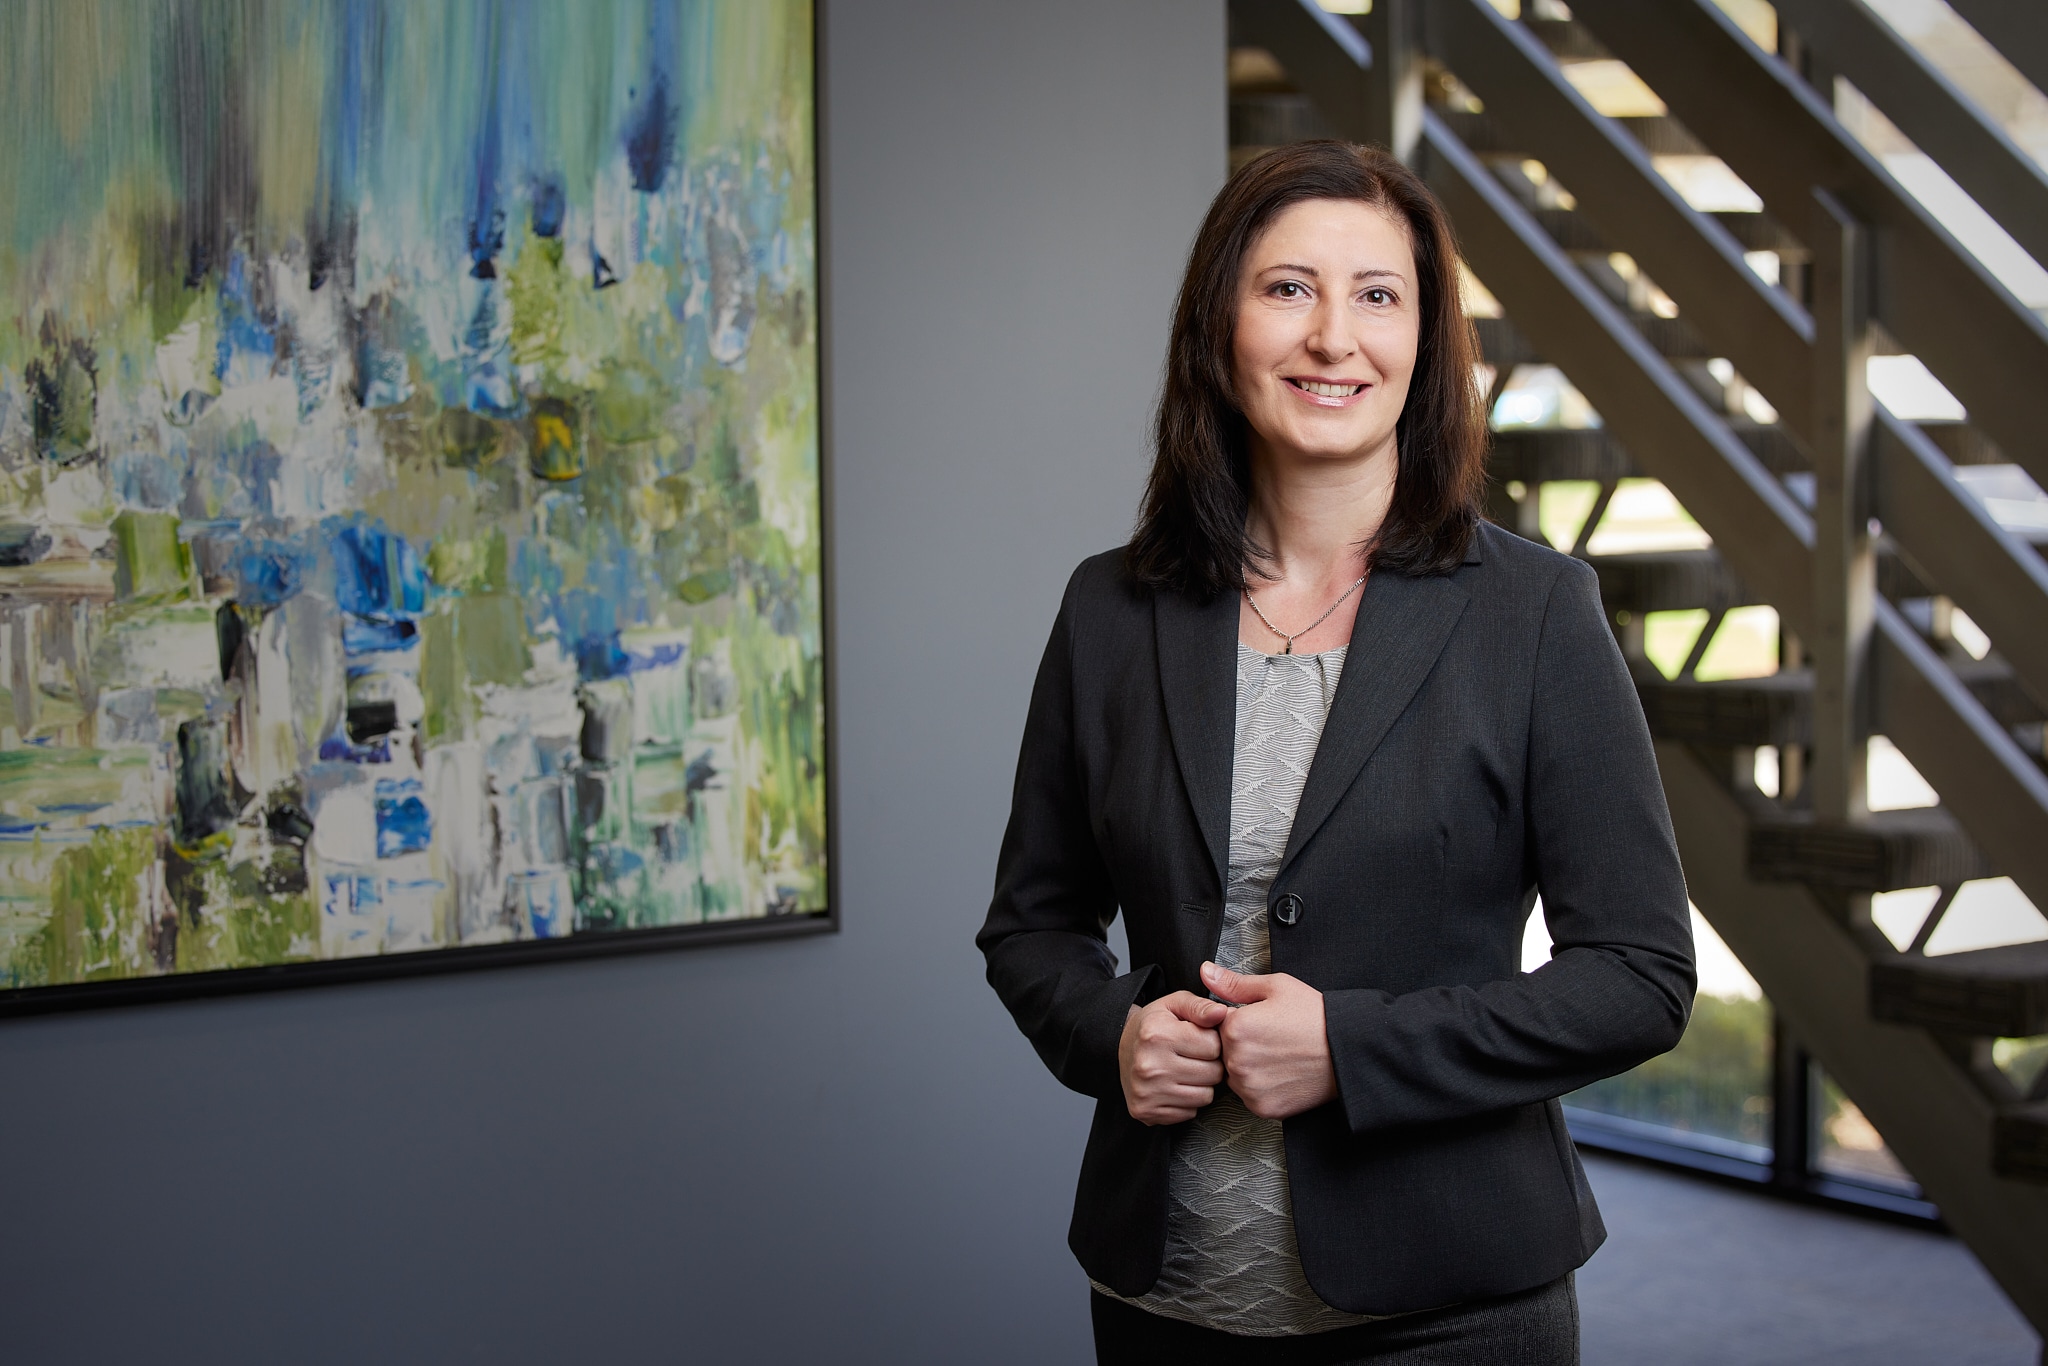 An image of Lia Miruashvili, Tax Accountant at Ford Keast LLP in the London Ontario office.